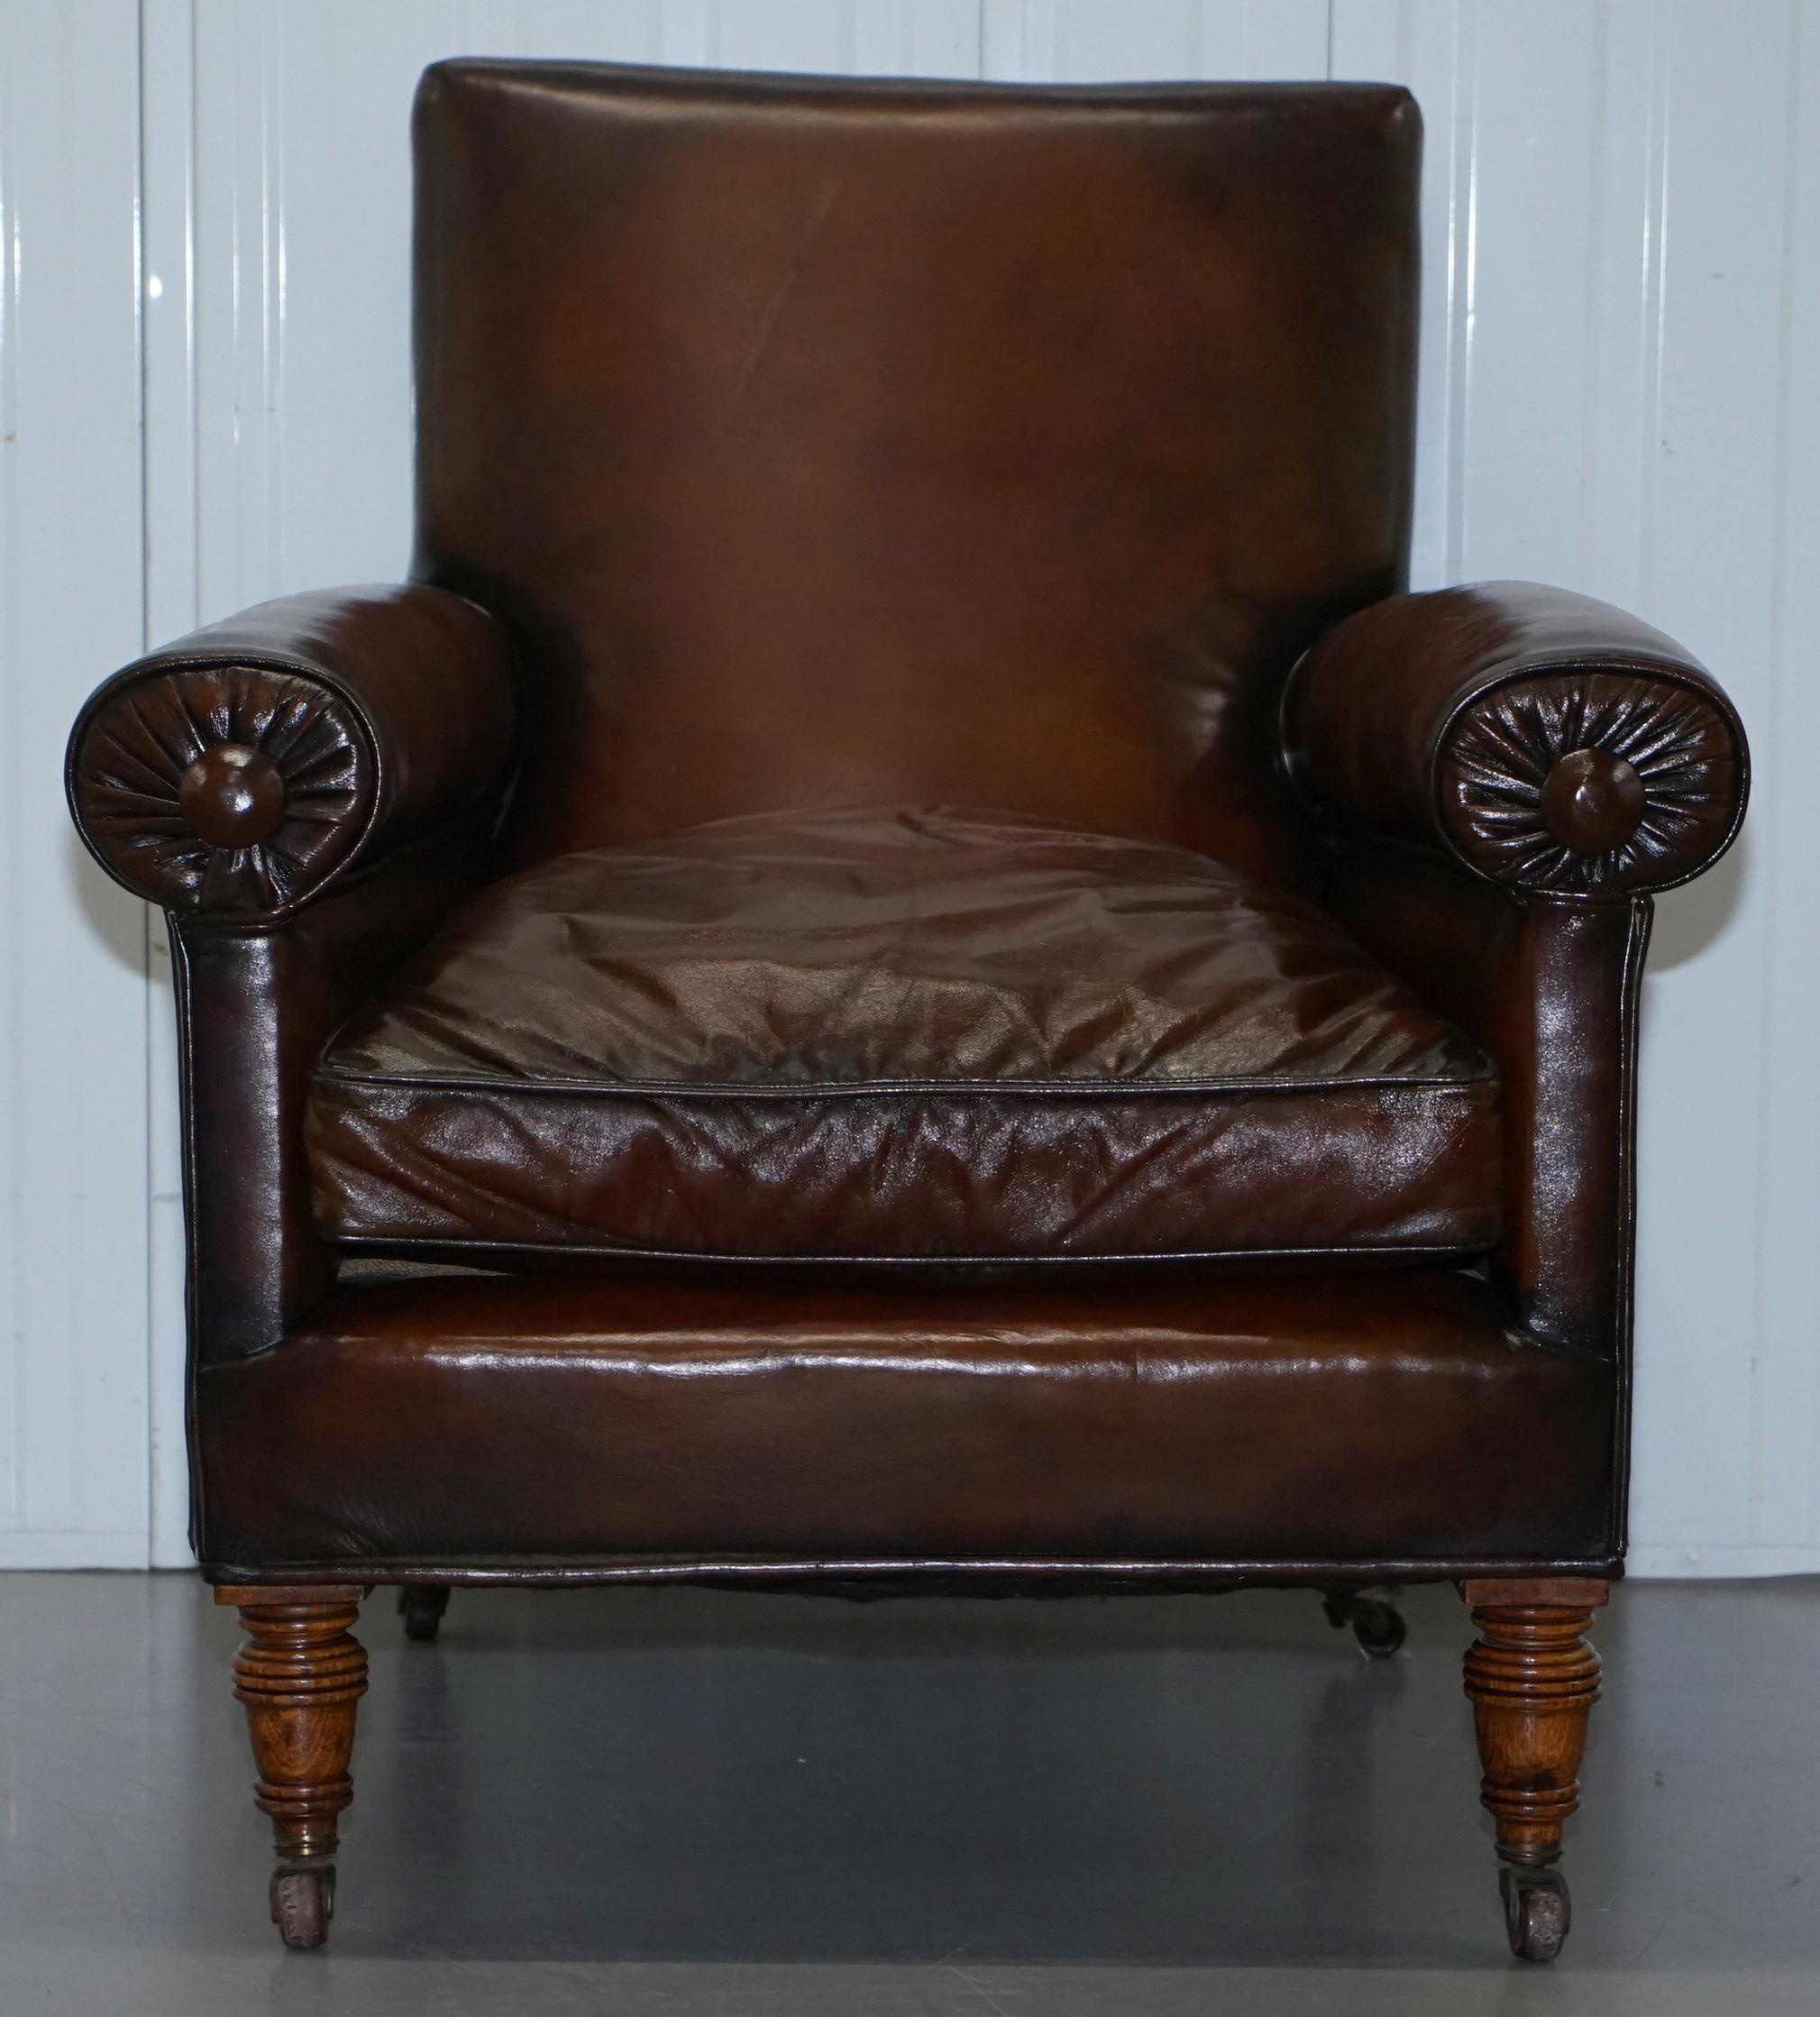 We are delighted to offer for sale this absolutely stunning original Bluster arm Maple & Co. fully restored deep tobacco brown leather club armchair

A very good looking and well made piece, its rare to find bluster armchairs, they are usually on